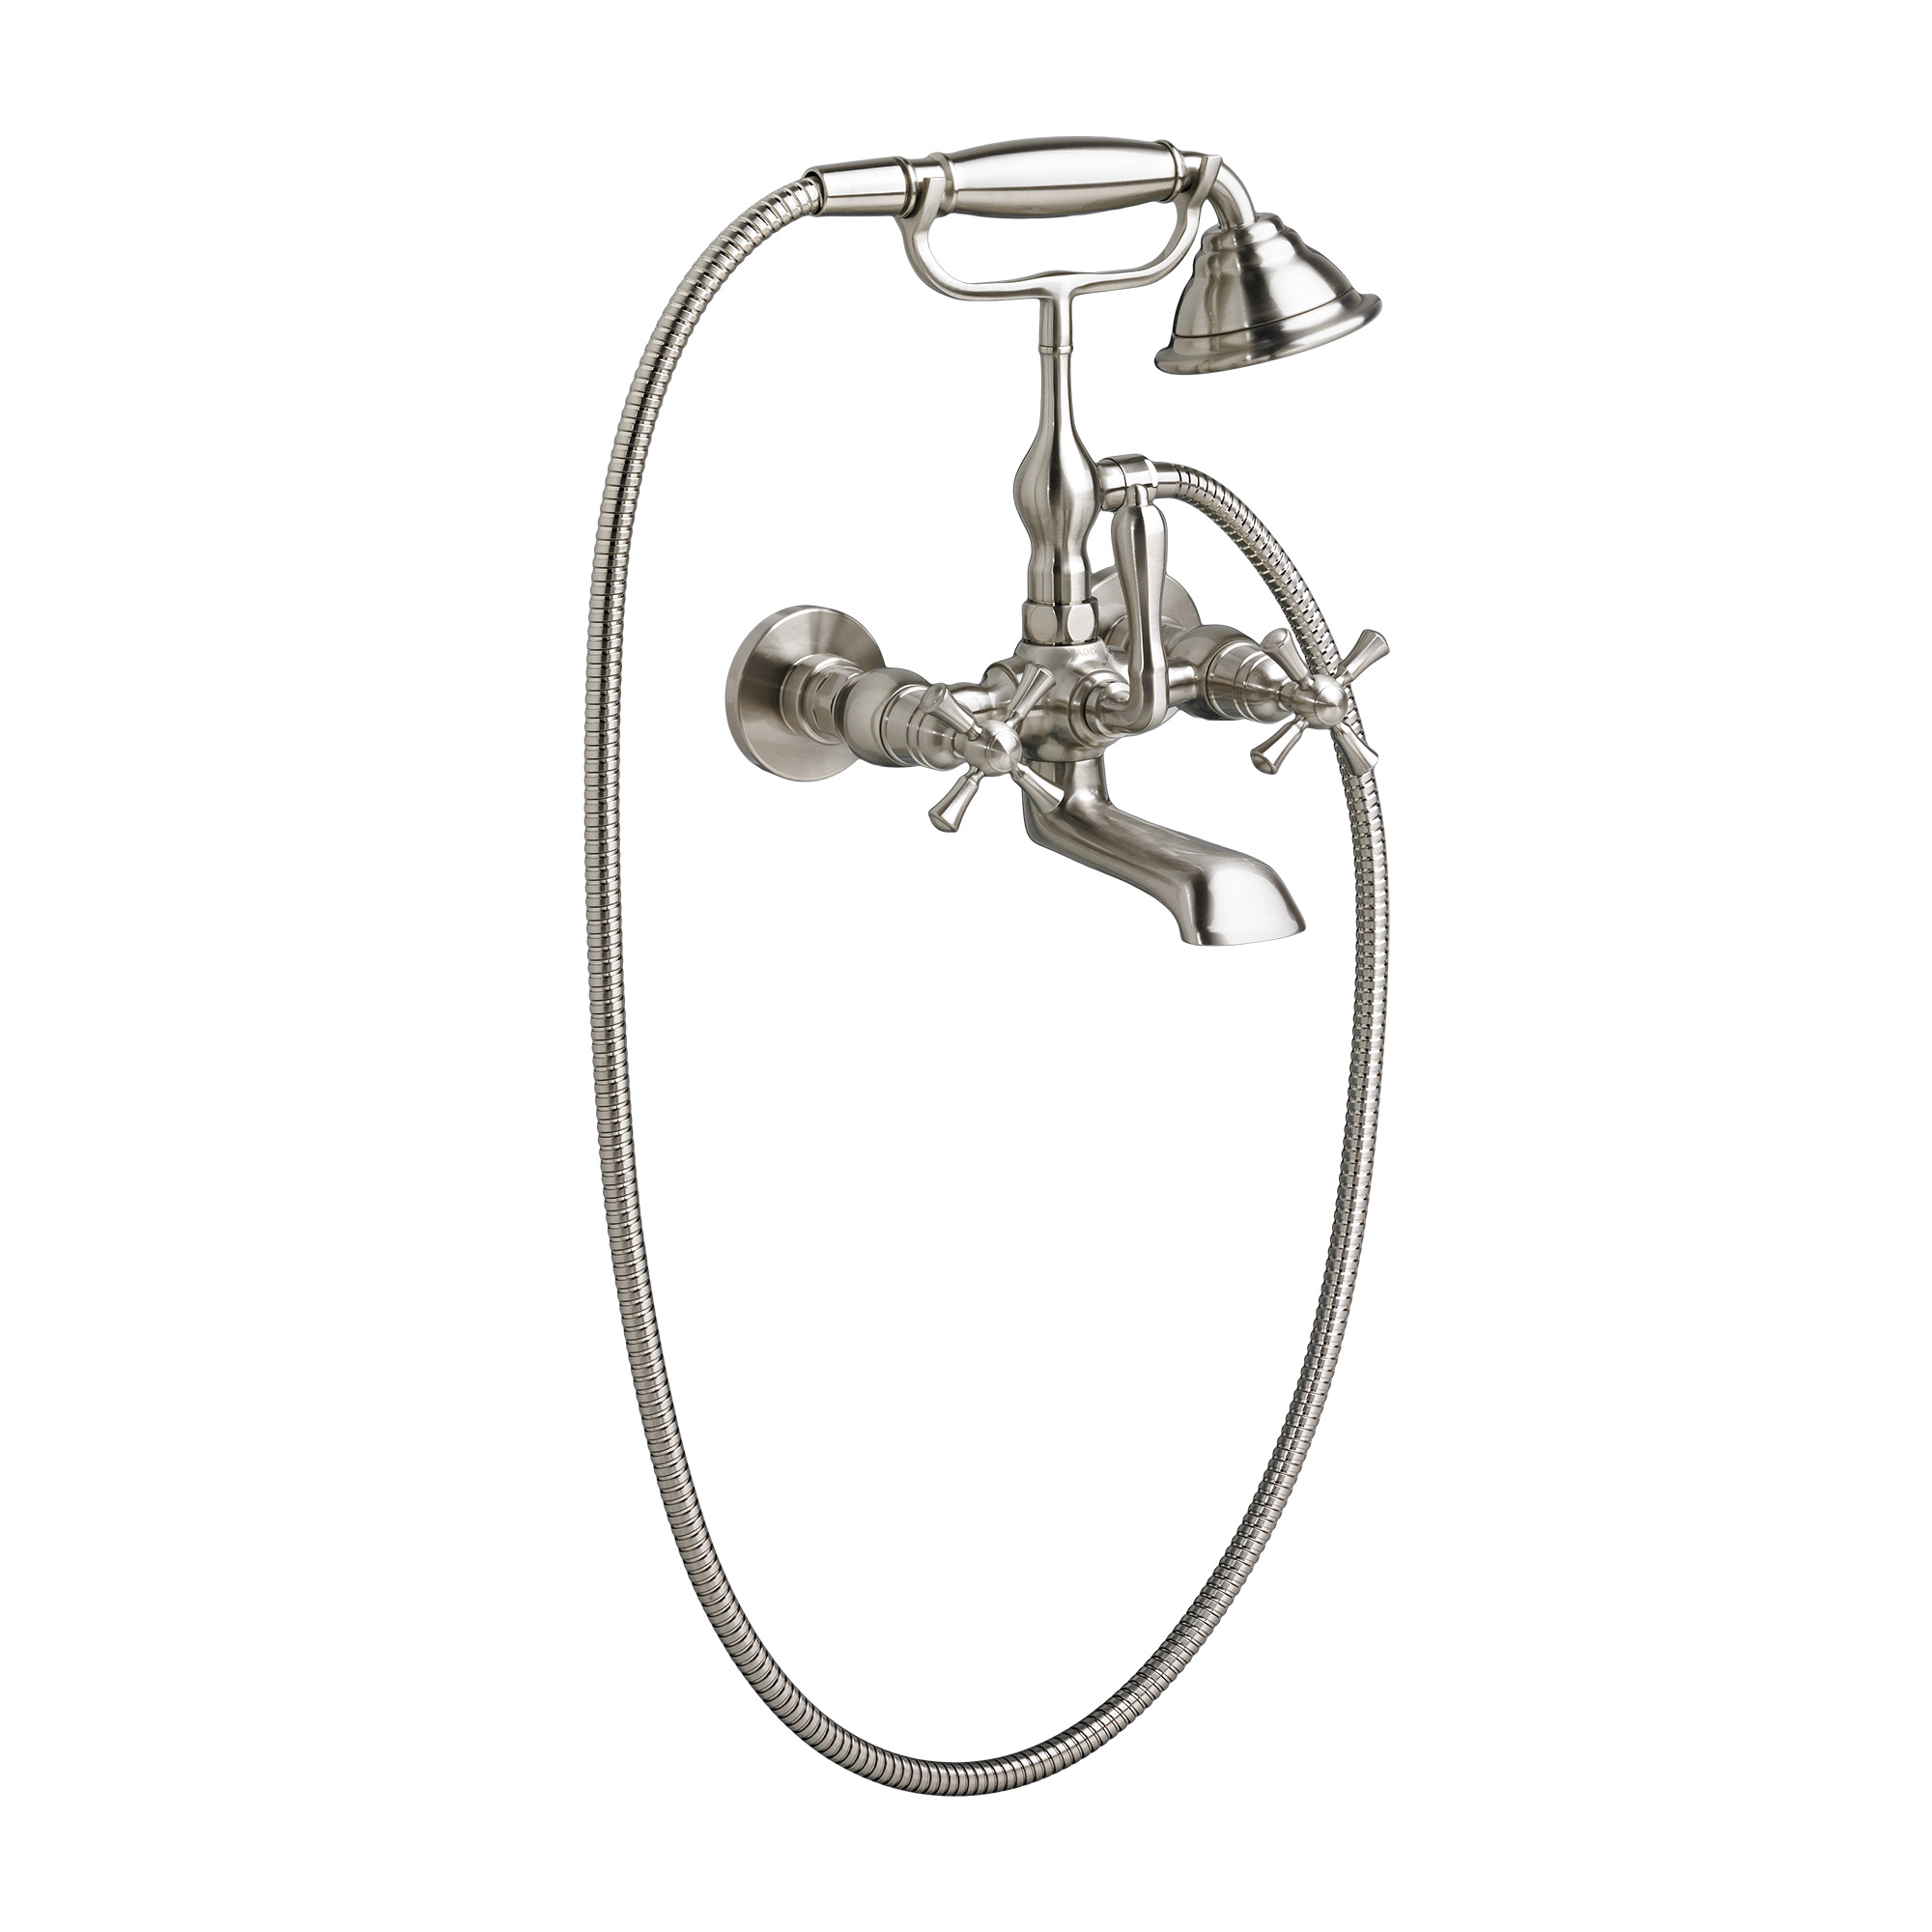 Randall Exposed Tub Filler With HS